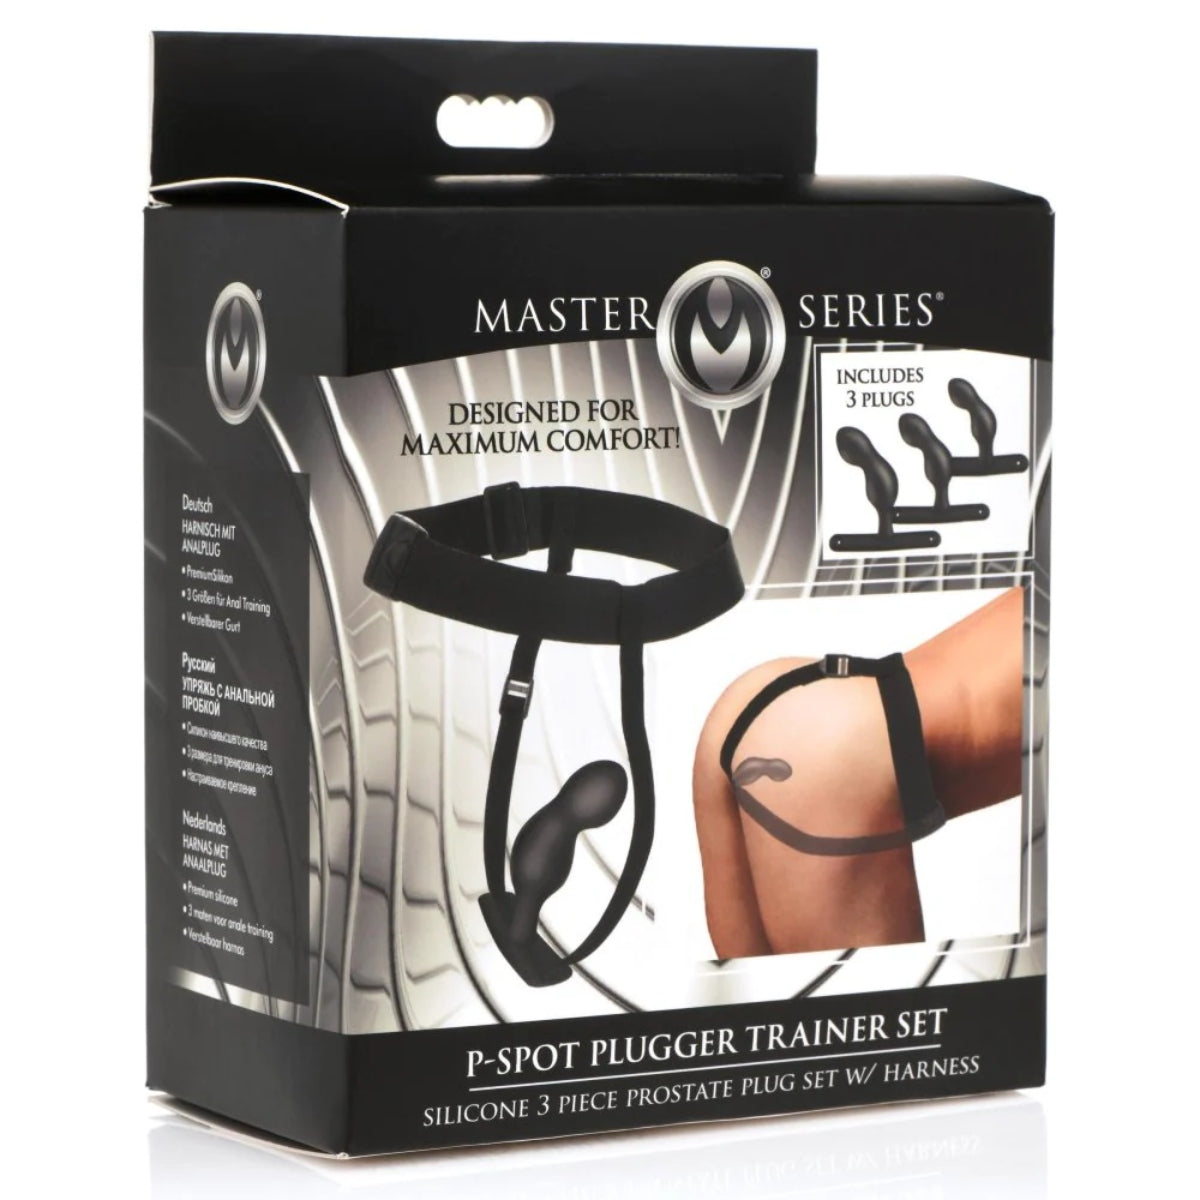 Master Series P-Spot Plugger Trainer Set Silicone 3 Piece Prostate Plug Set With Harness Black